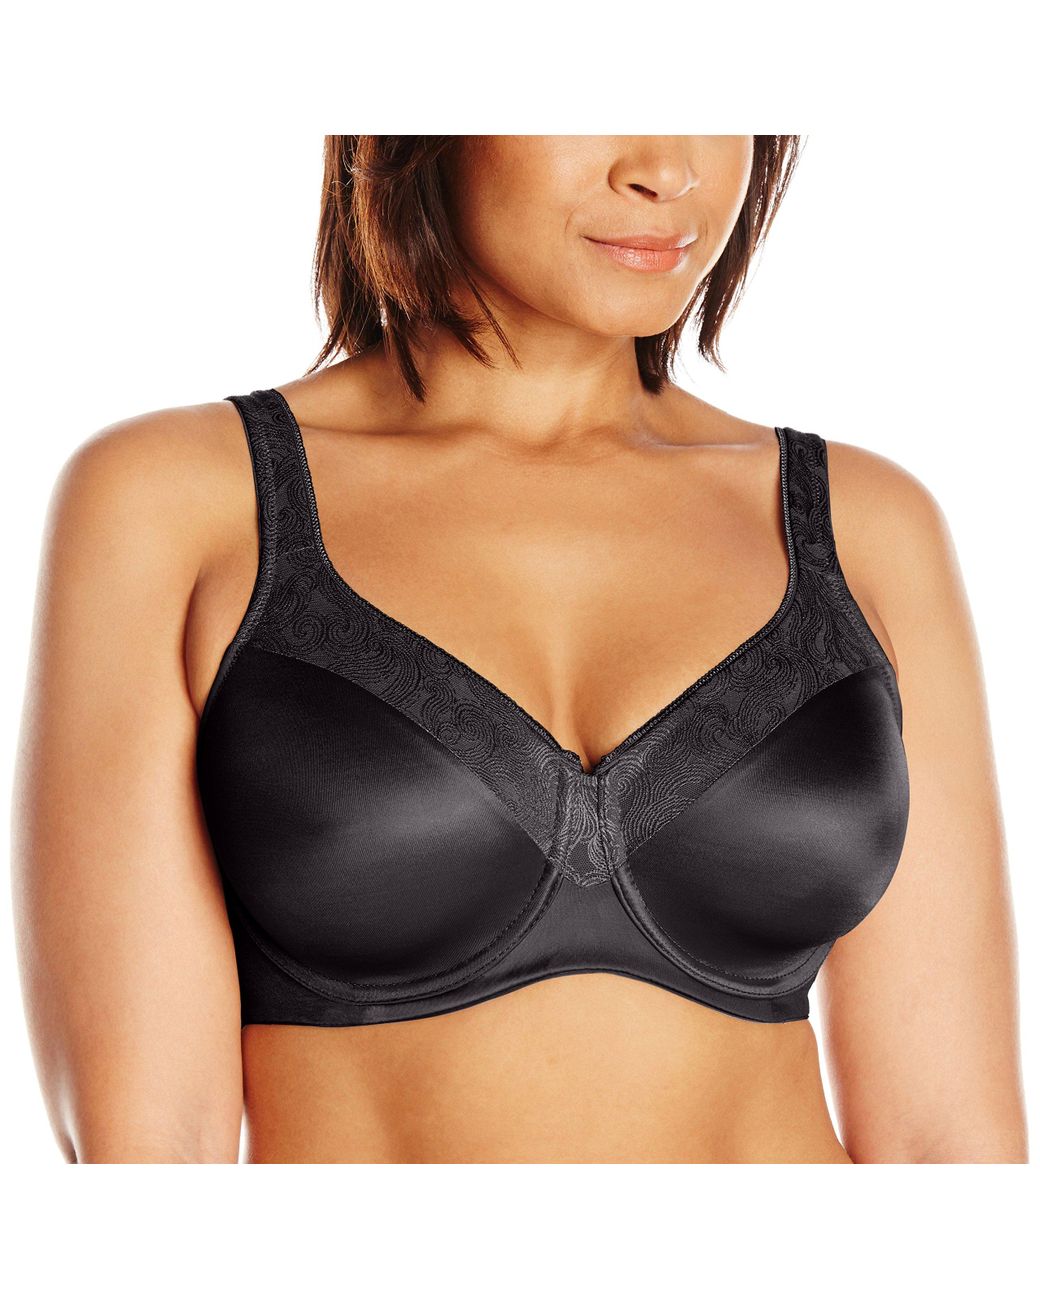 Playtex Secrets Undercover Slimming With Shaping Foam